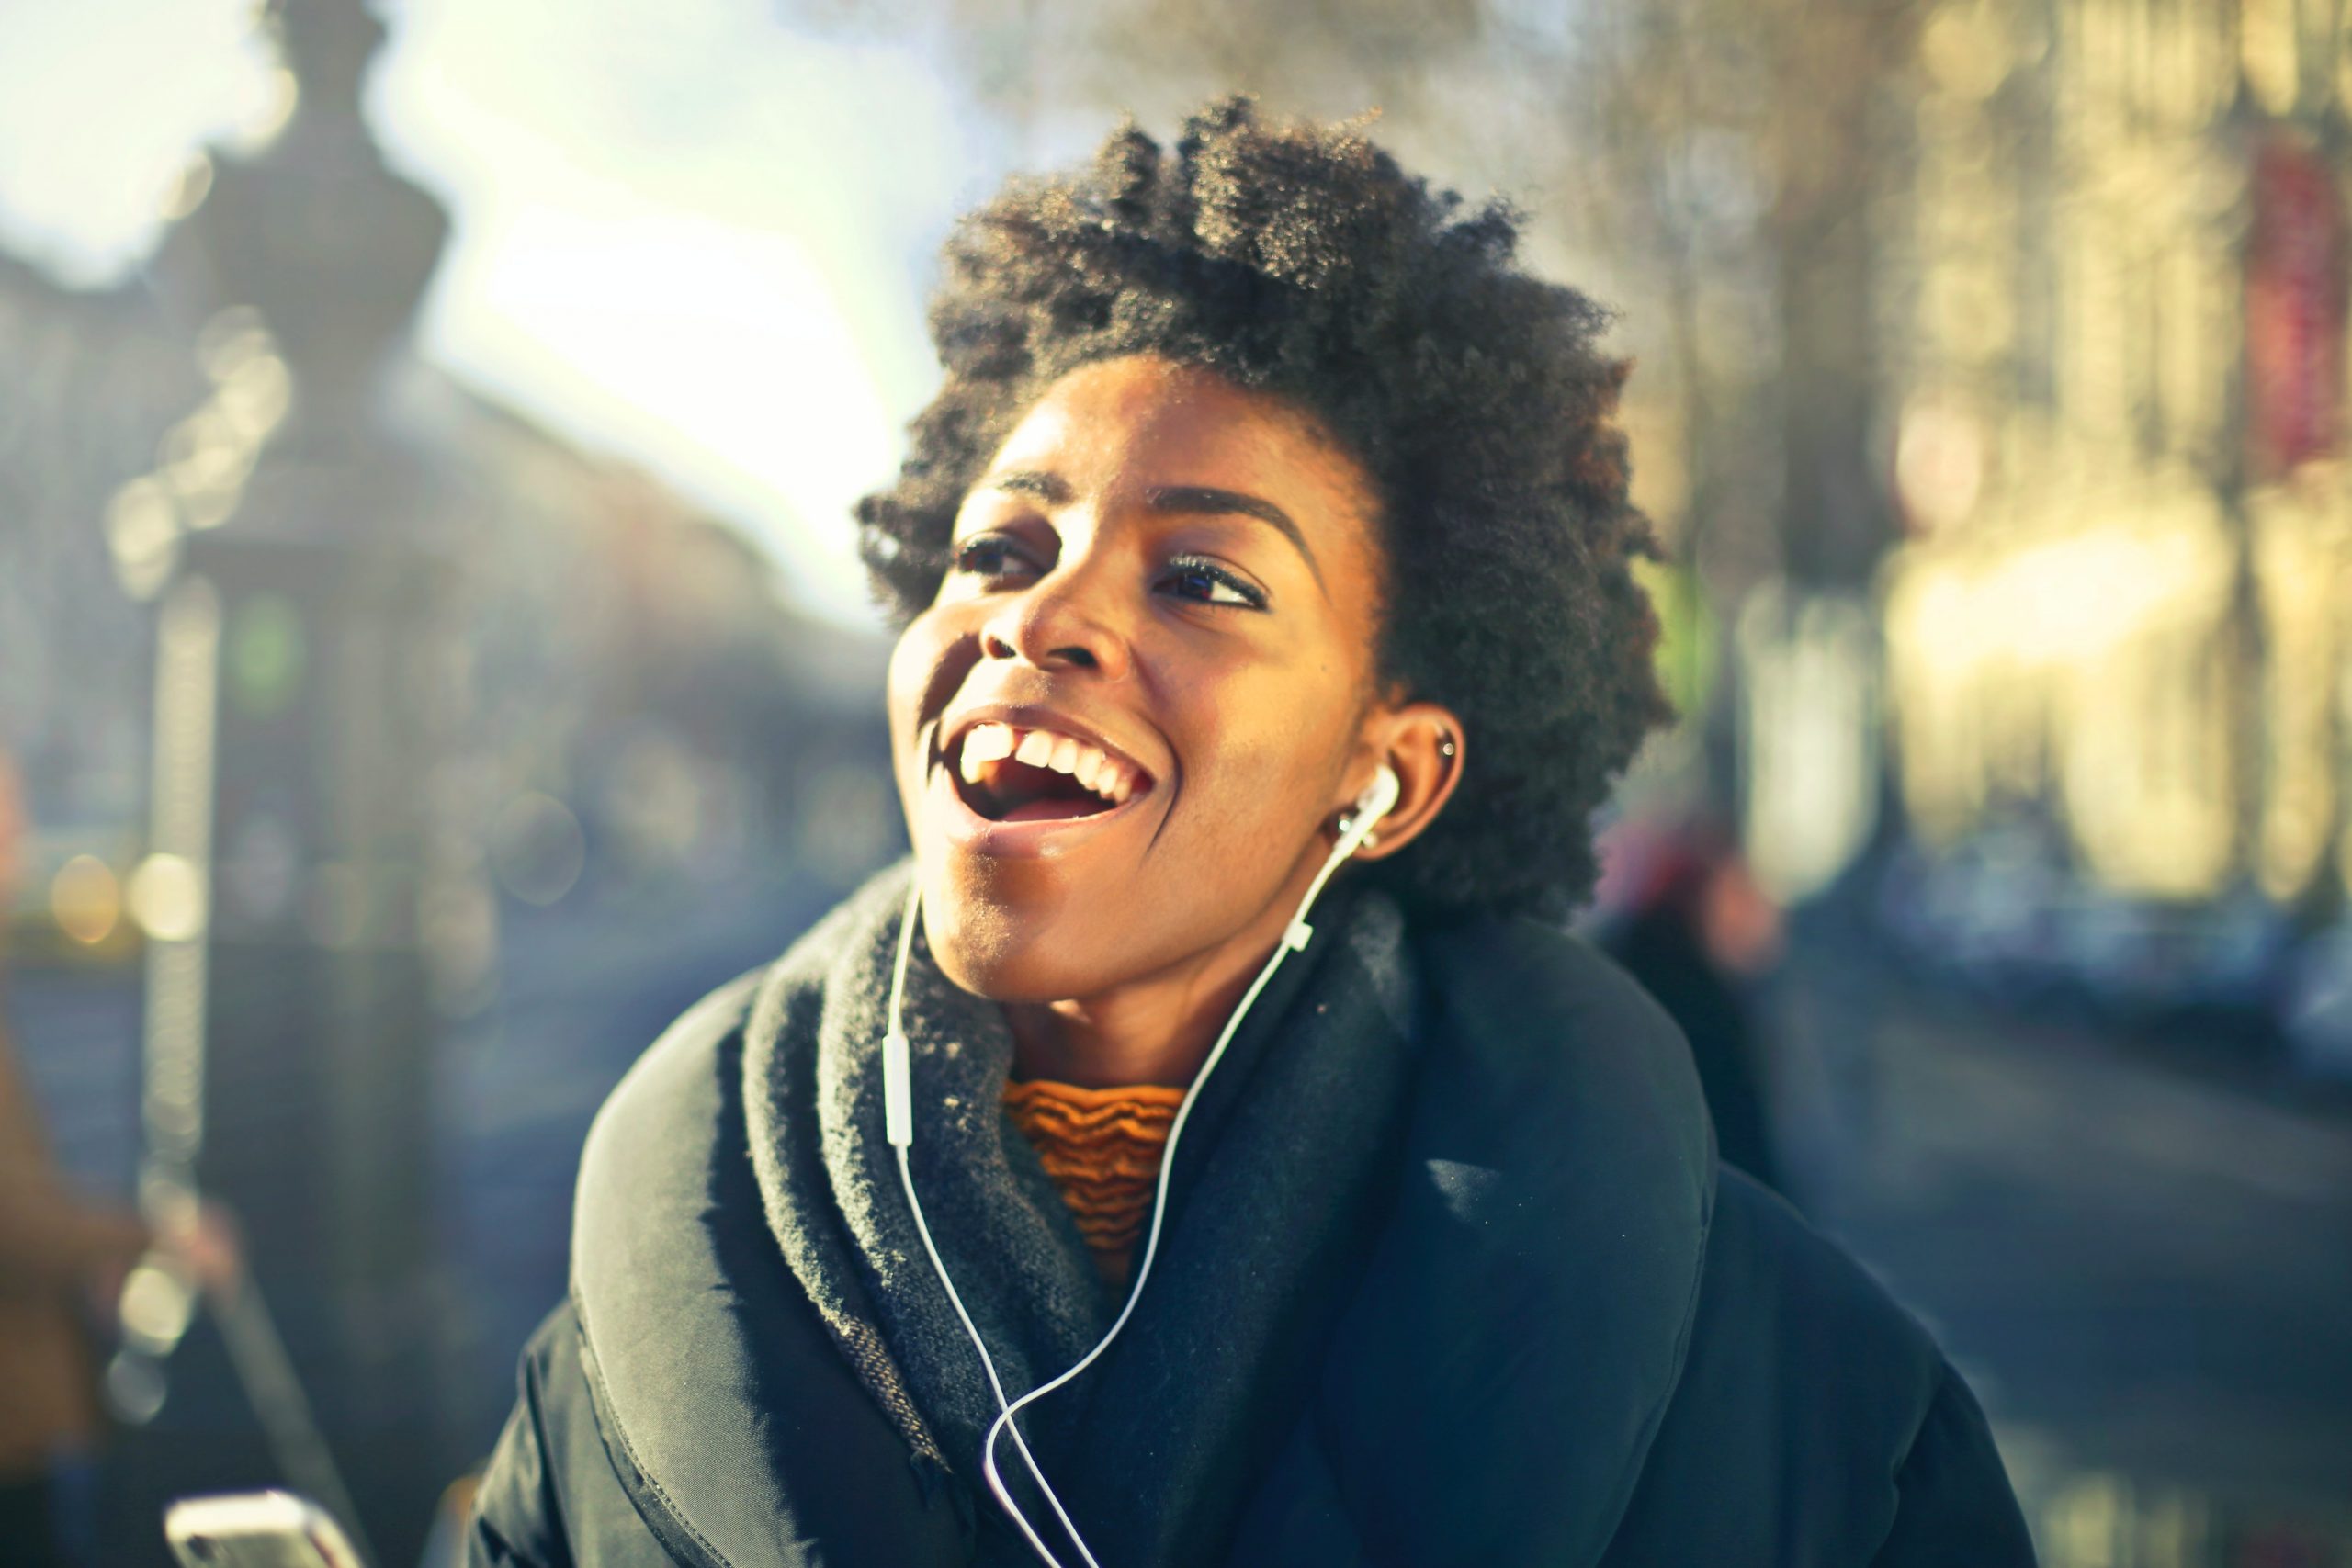 Woman listening to music through headphones and singing